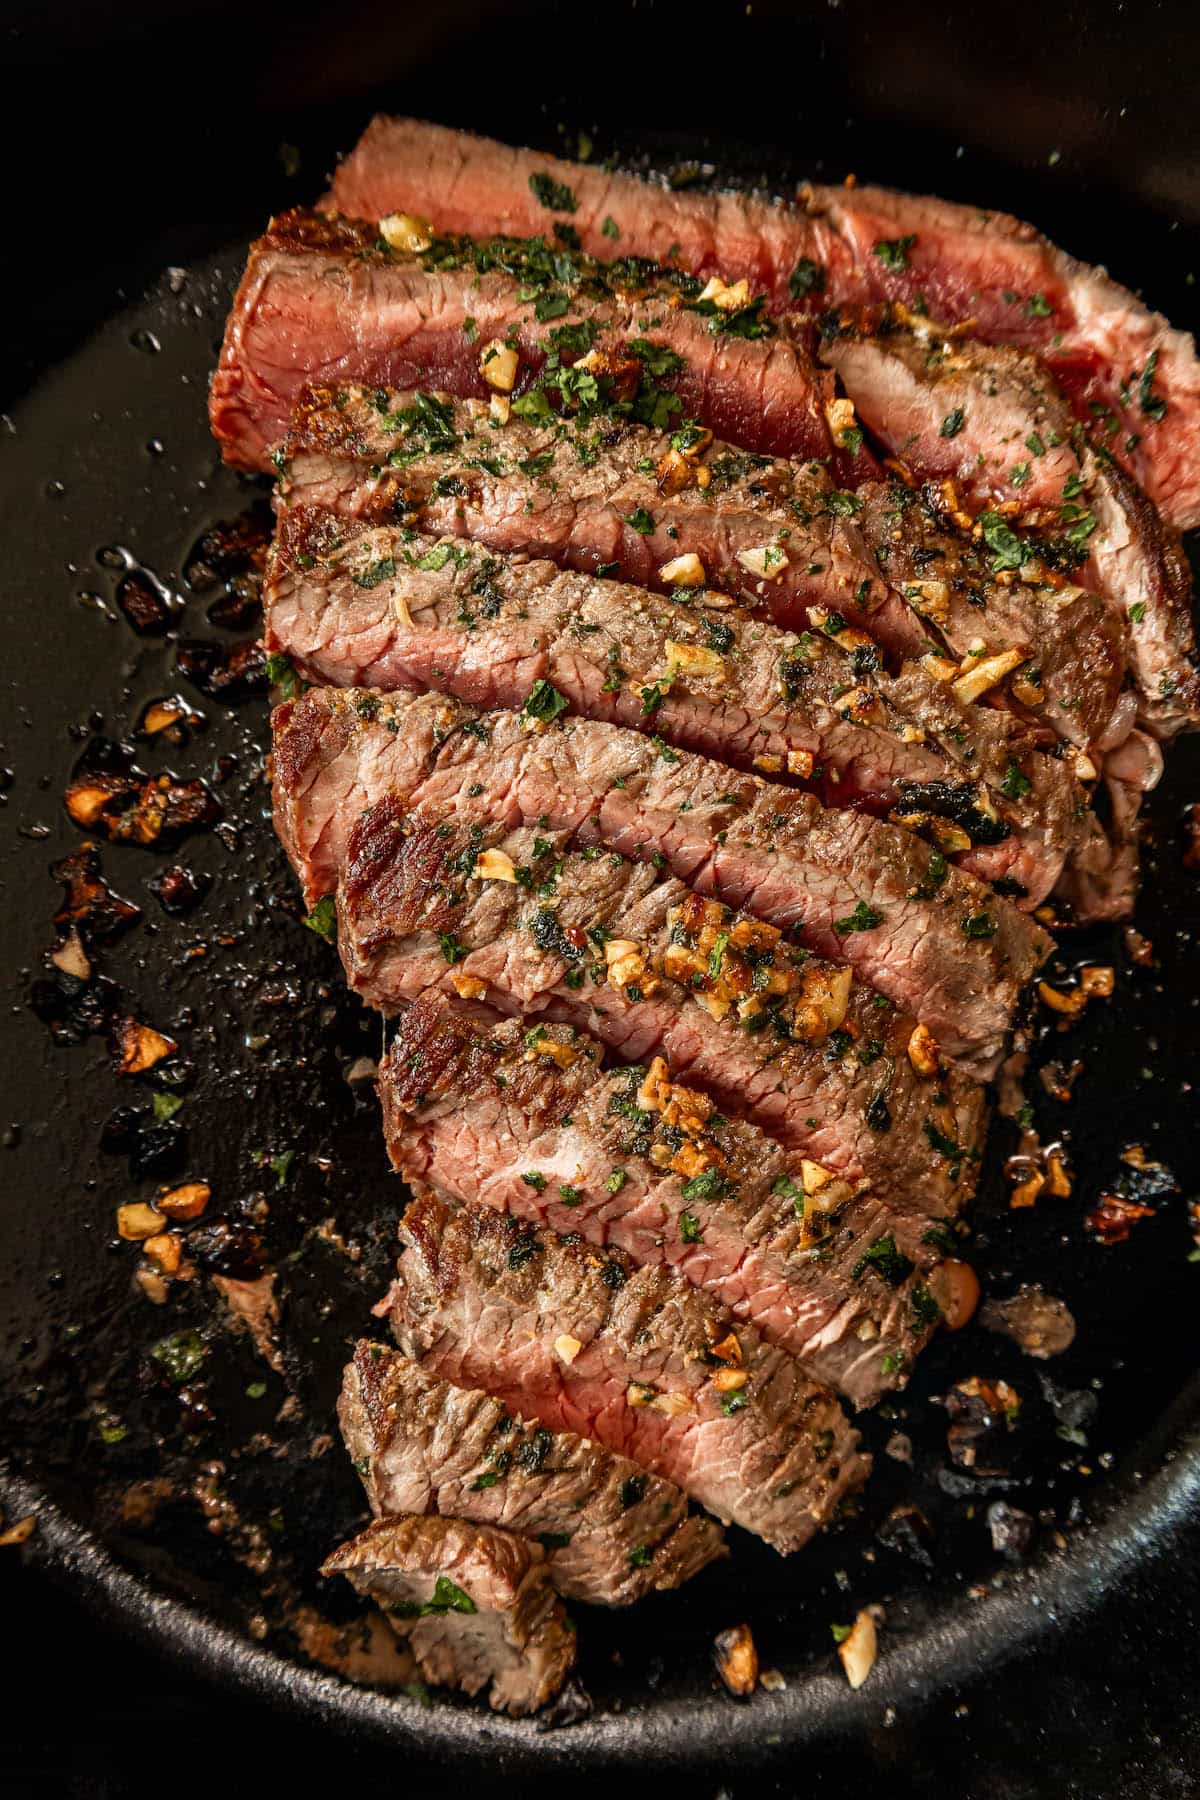 Keto London broil steak with herbs and spices.